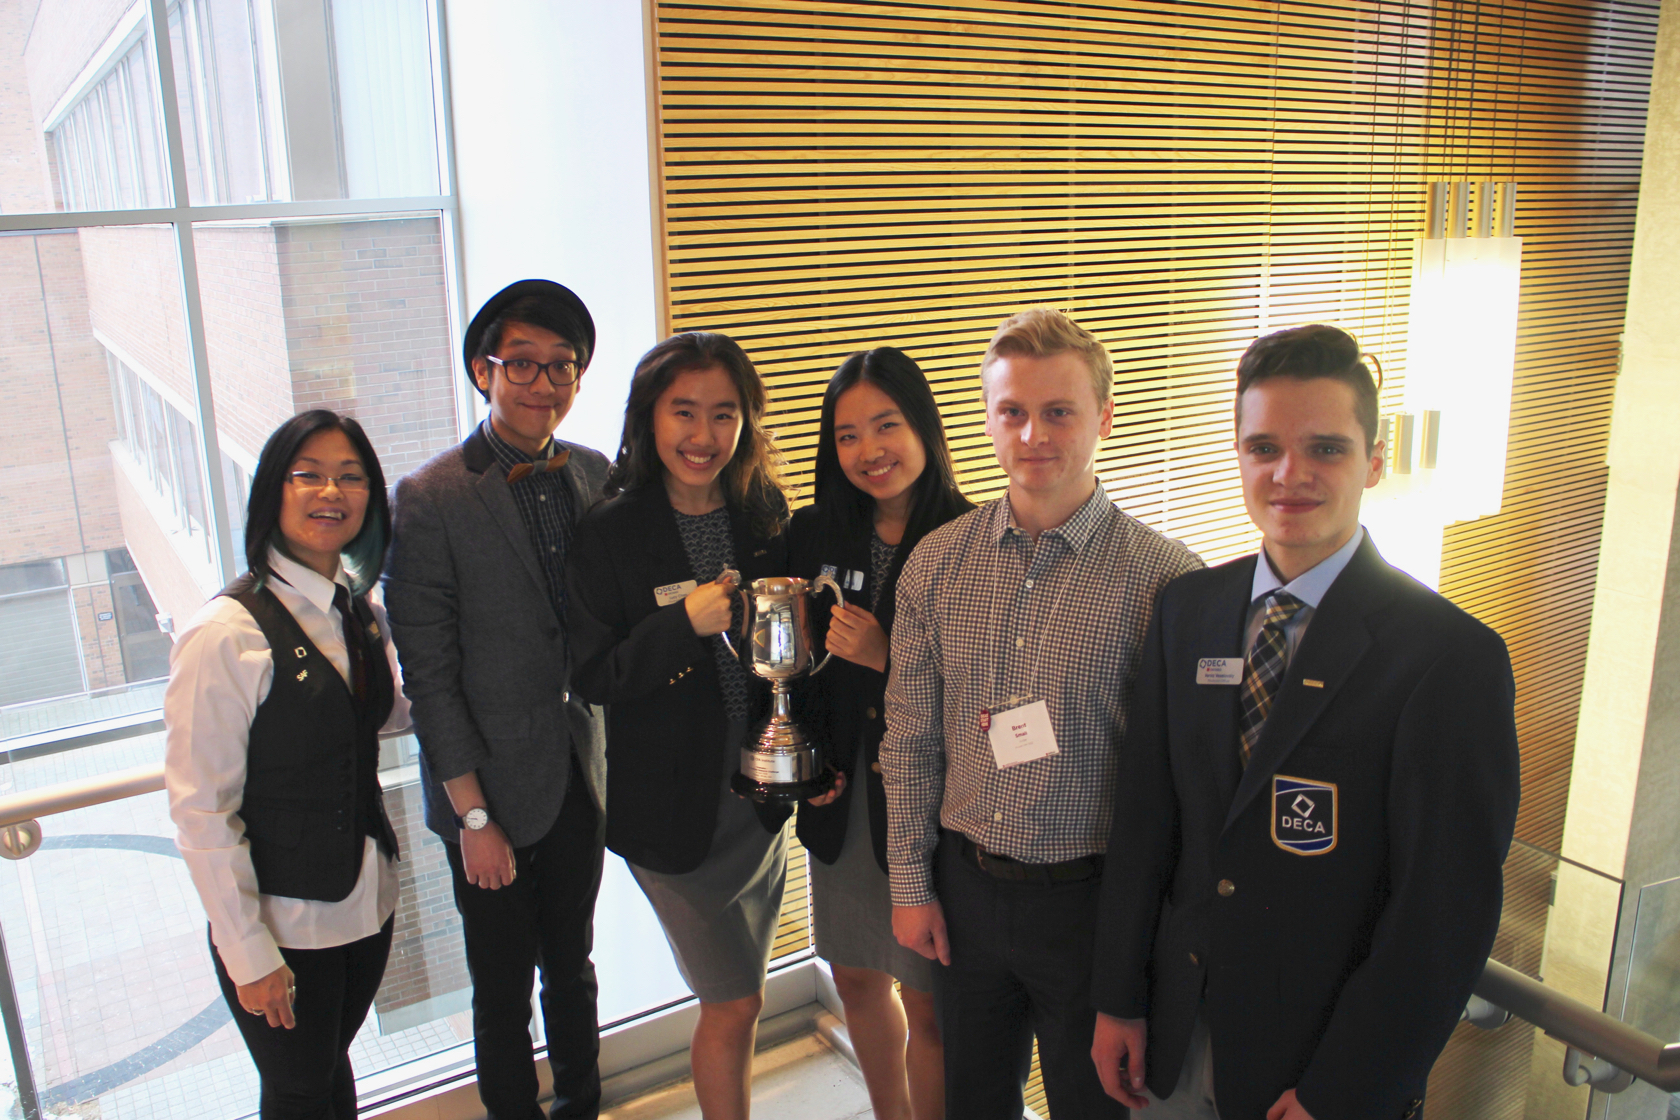 Marco, Extempra's founder, posing with Brad (the other keynote speaker) along with the SAF & DECA teams